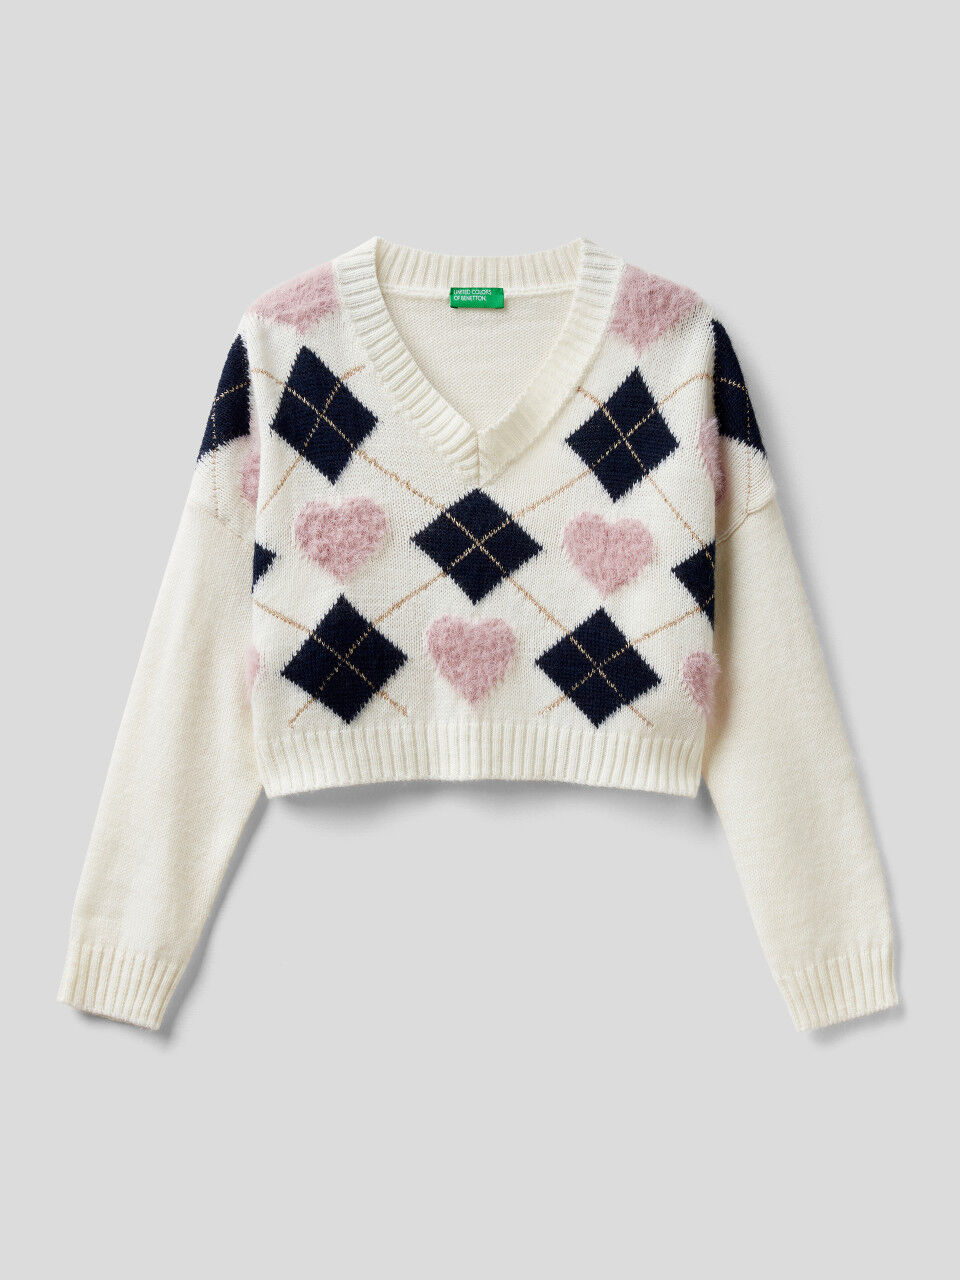 Cropped check sweater with hearts